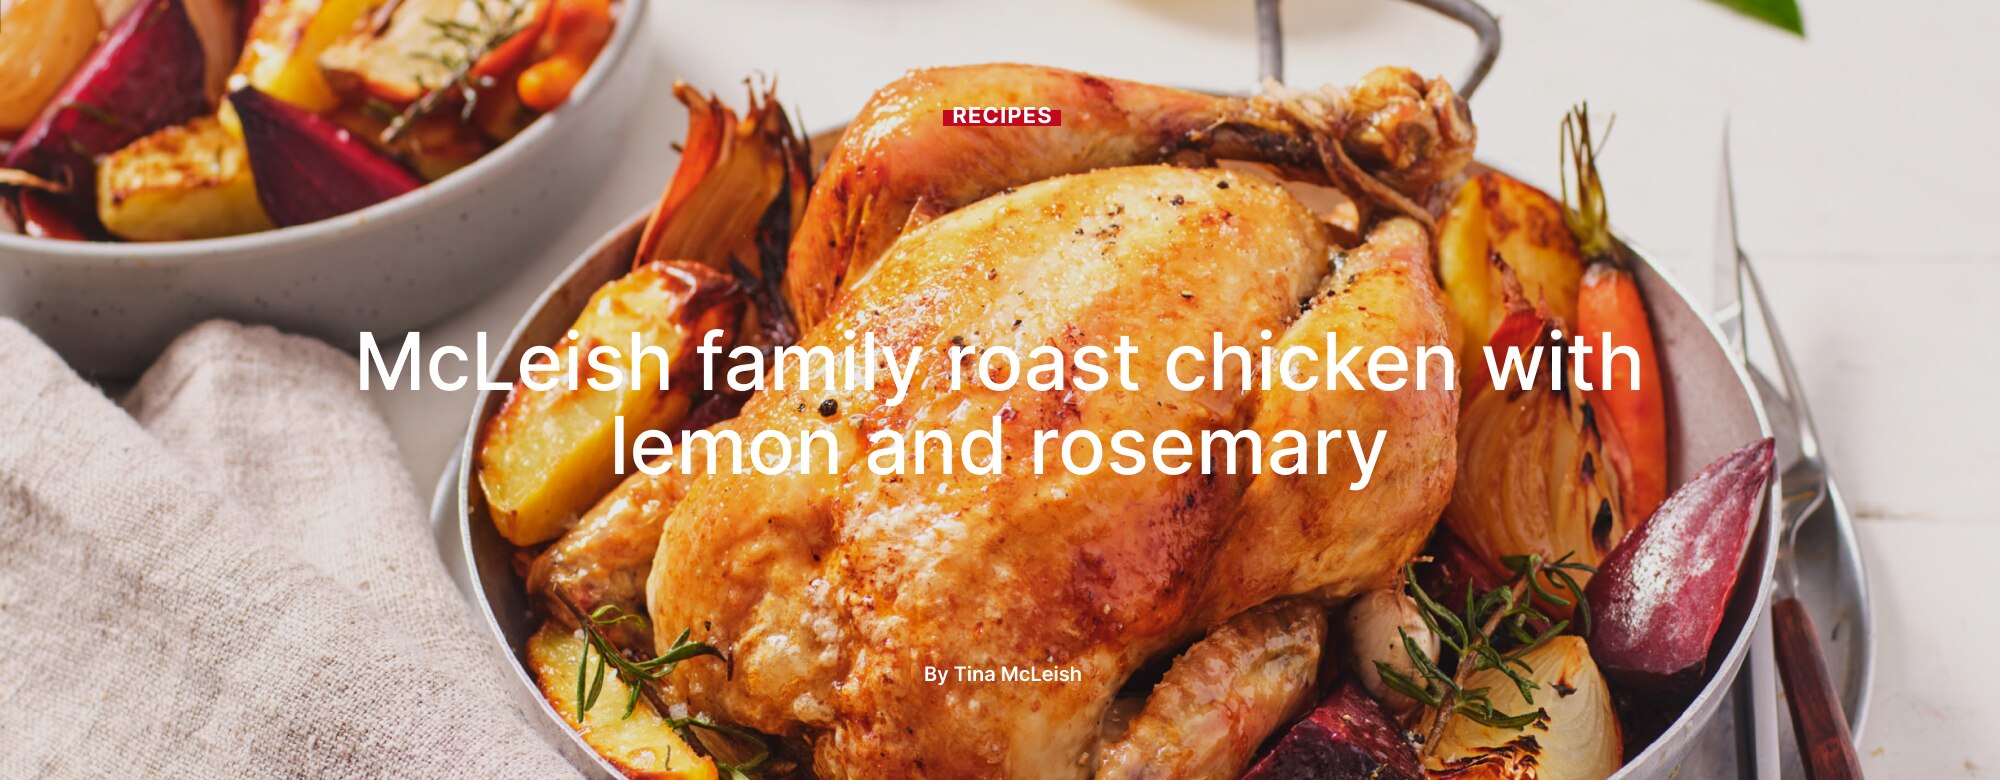 McLeish family roast chicken with lemon and rosemary